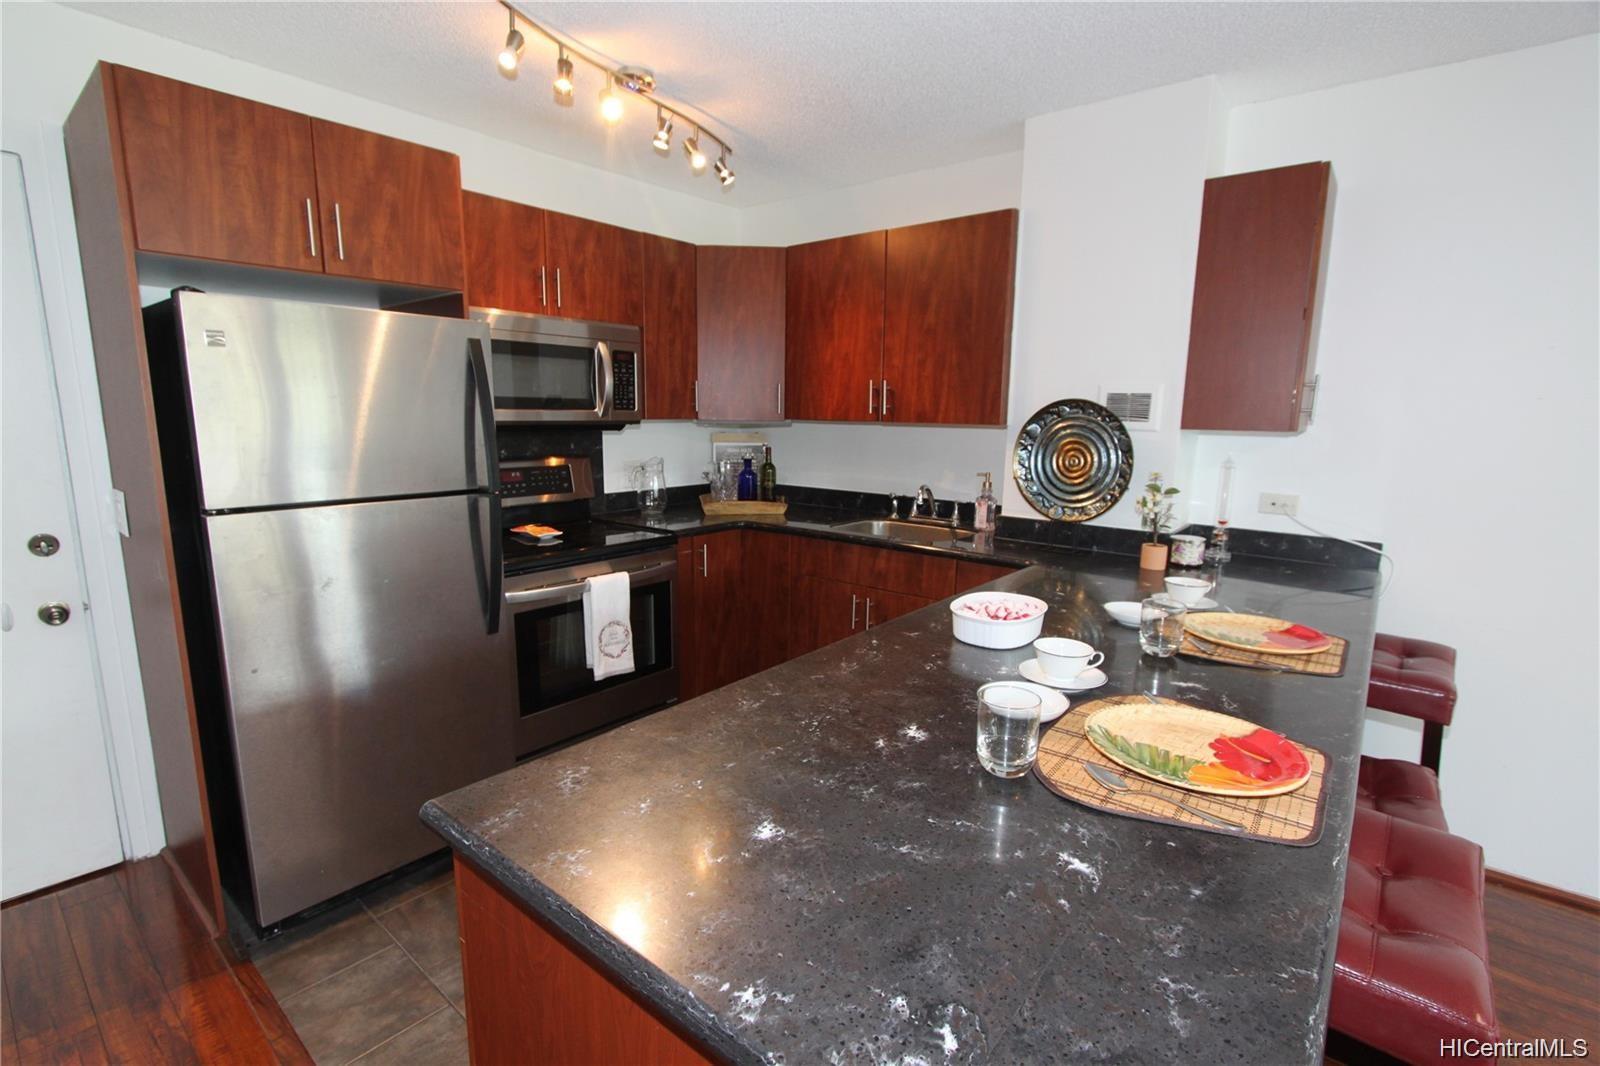 a kitchen with stainless steel appliances granite countertop a refrigerator a sink and a stove with wooden floor